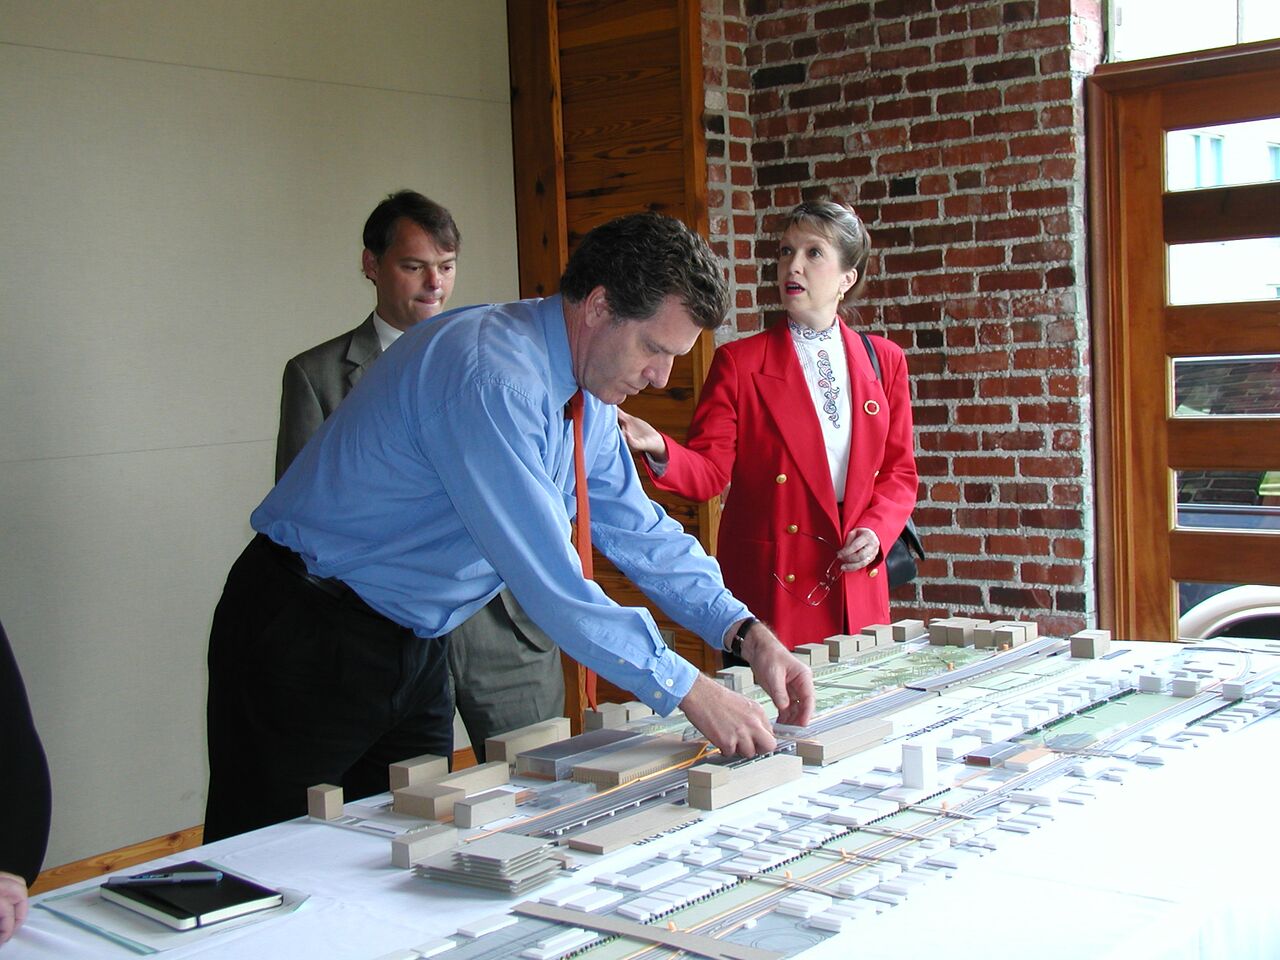 Giles and others looking at an early model of Railroad Park. 